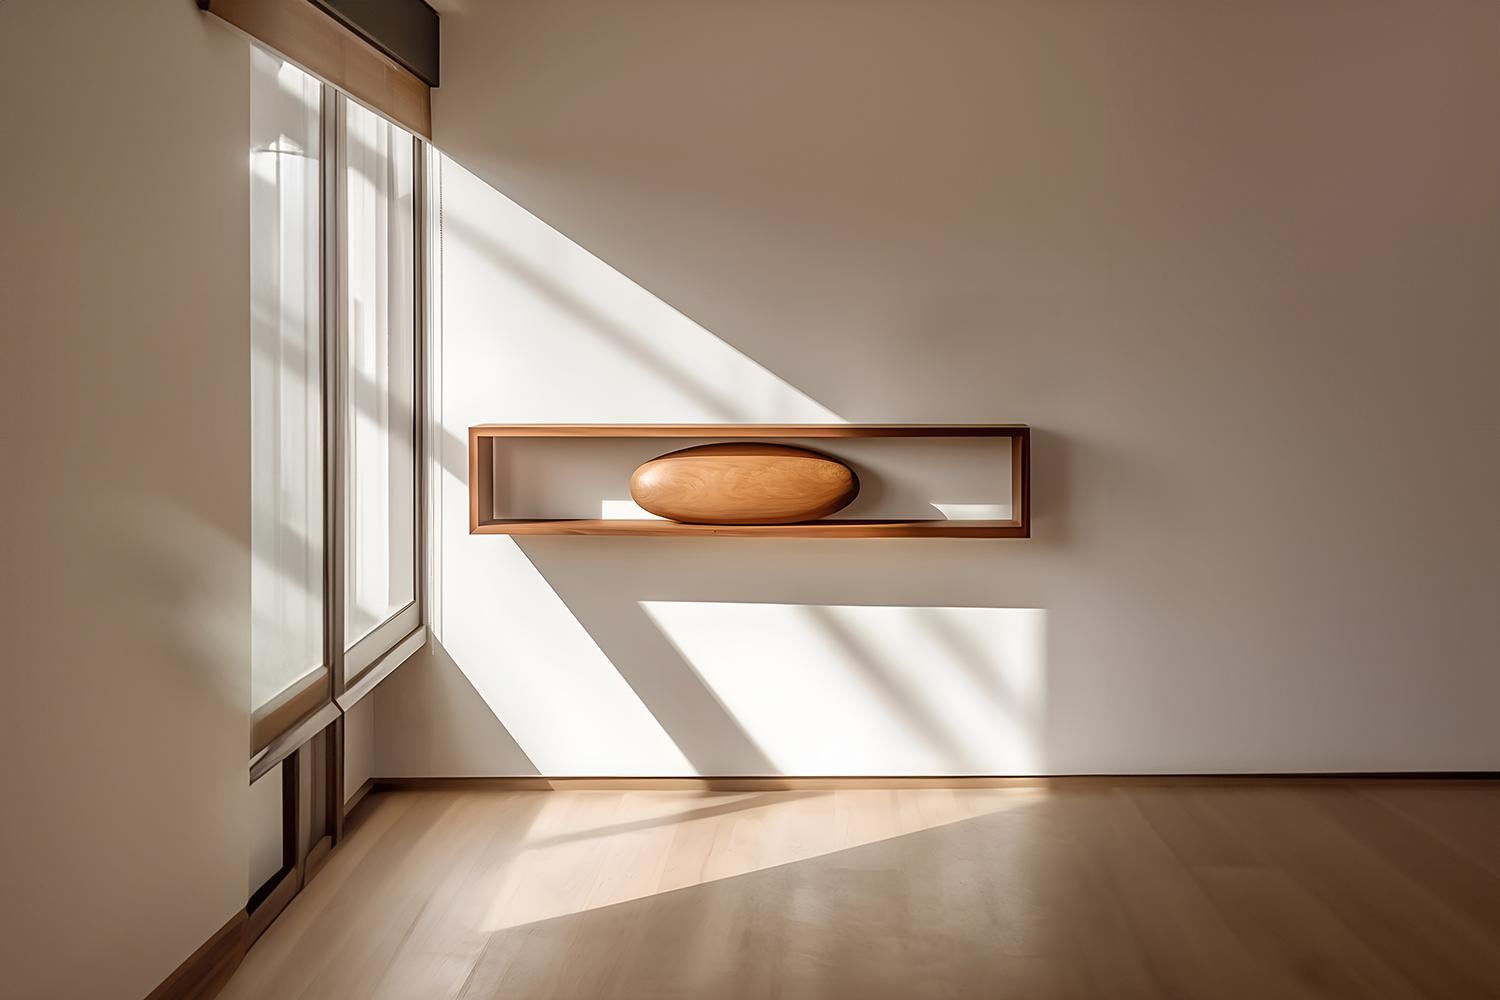 Large Rectangular Floating Shelf with One Sculptural Wooden Pebble Accent, Sereno by Joel Escalona

—

What happens when the practical becomes art?
What happens when ornamentation gains significance?

Those were the questions Joel Escalona asked